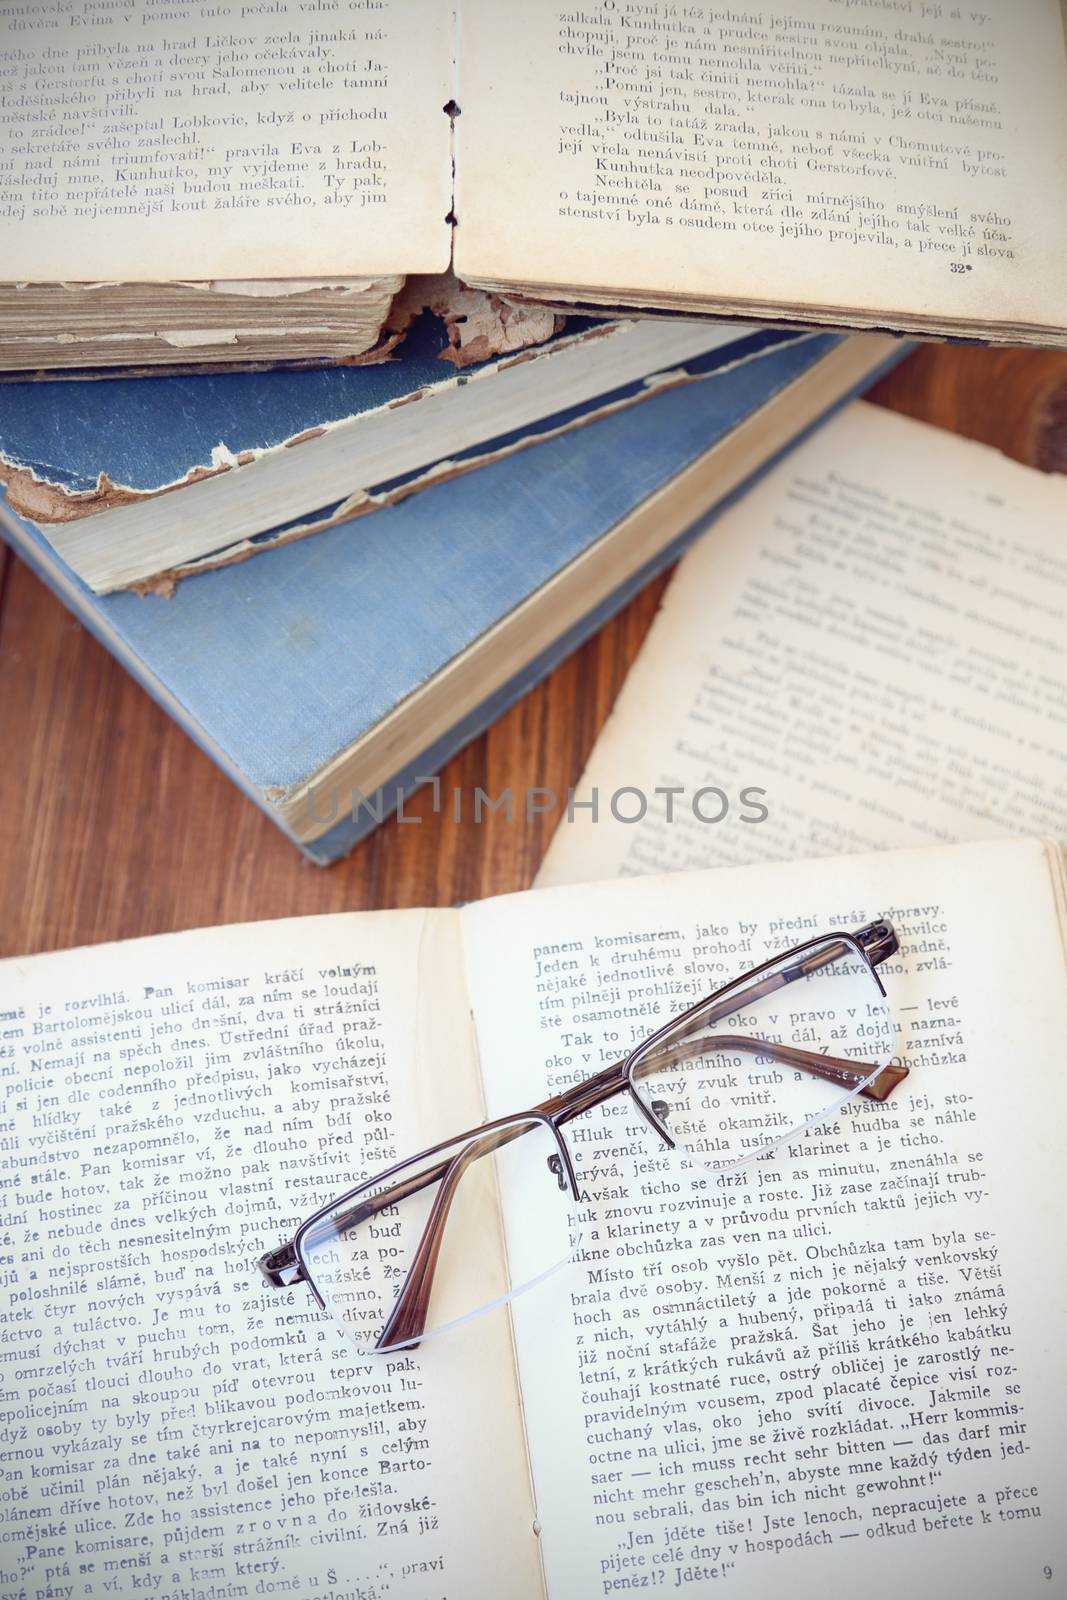 glasses lie on a few opened age-old books